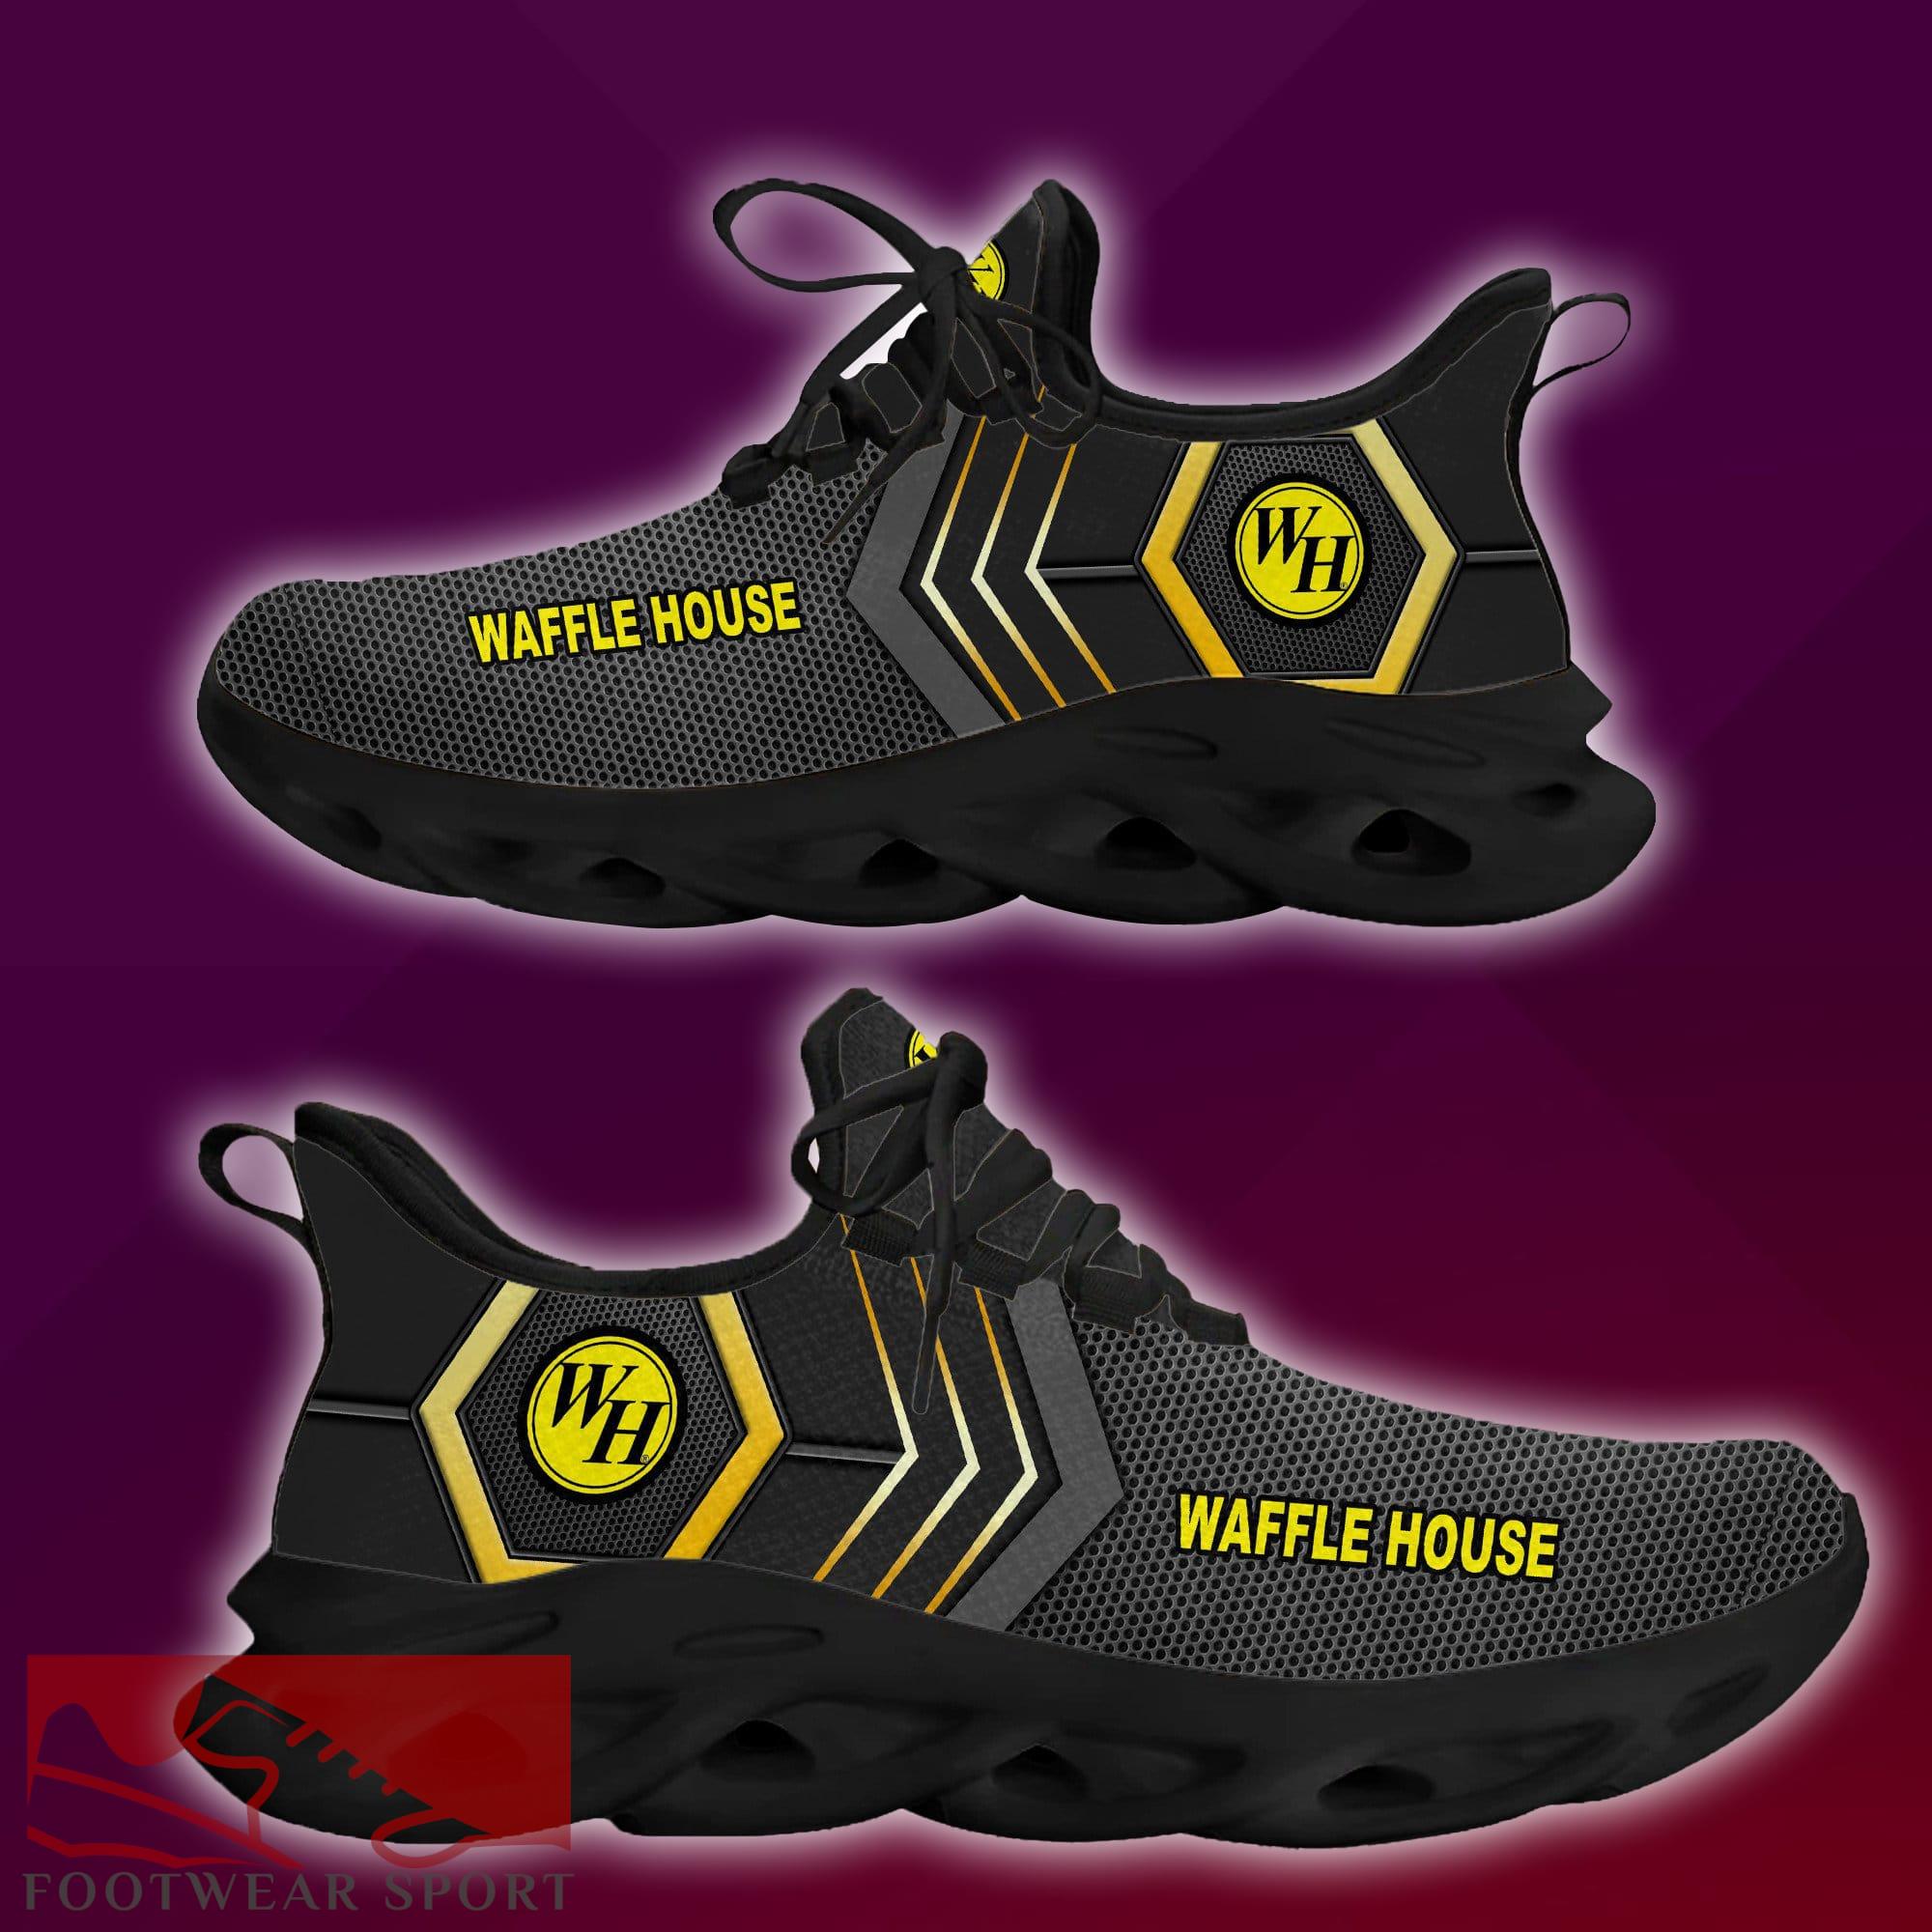 waffle house Brand New Logo Max Soul Sneakers Detail Running Shoes Gift - waffle house New Brand Chunky Shoes Style Max Soul Sneakers Photo 1